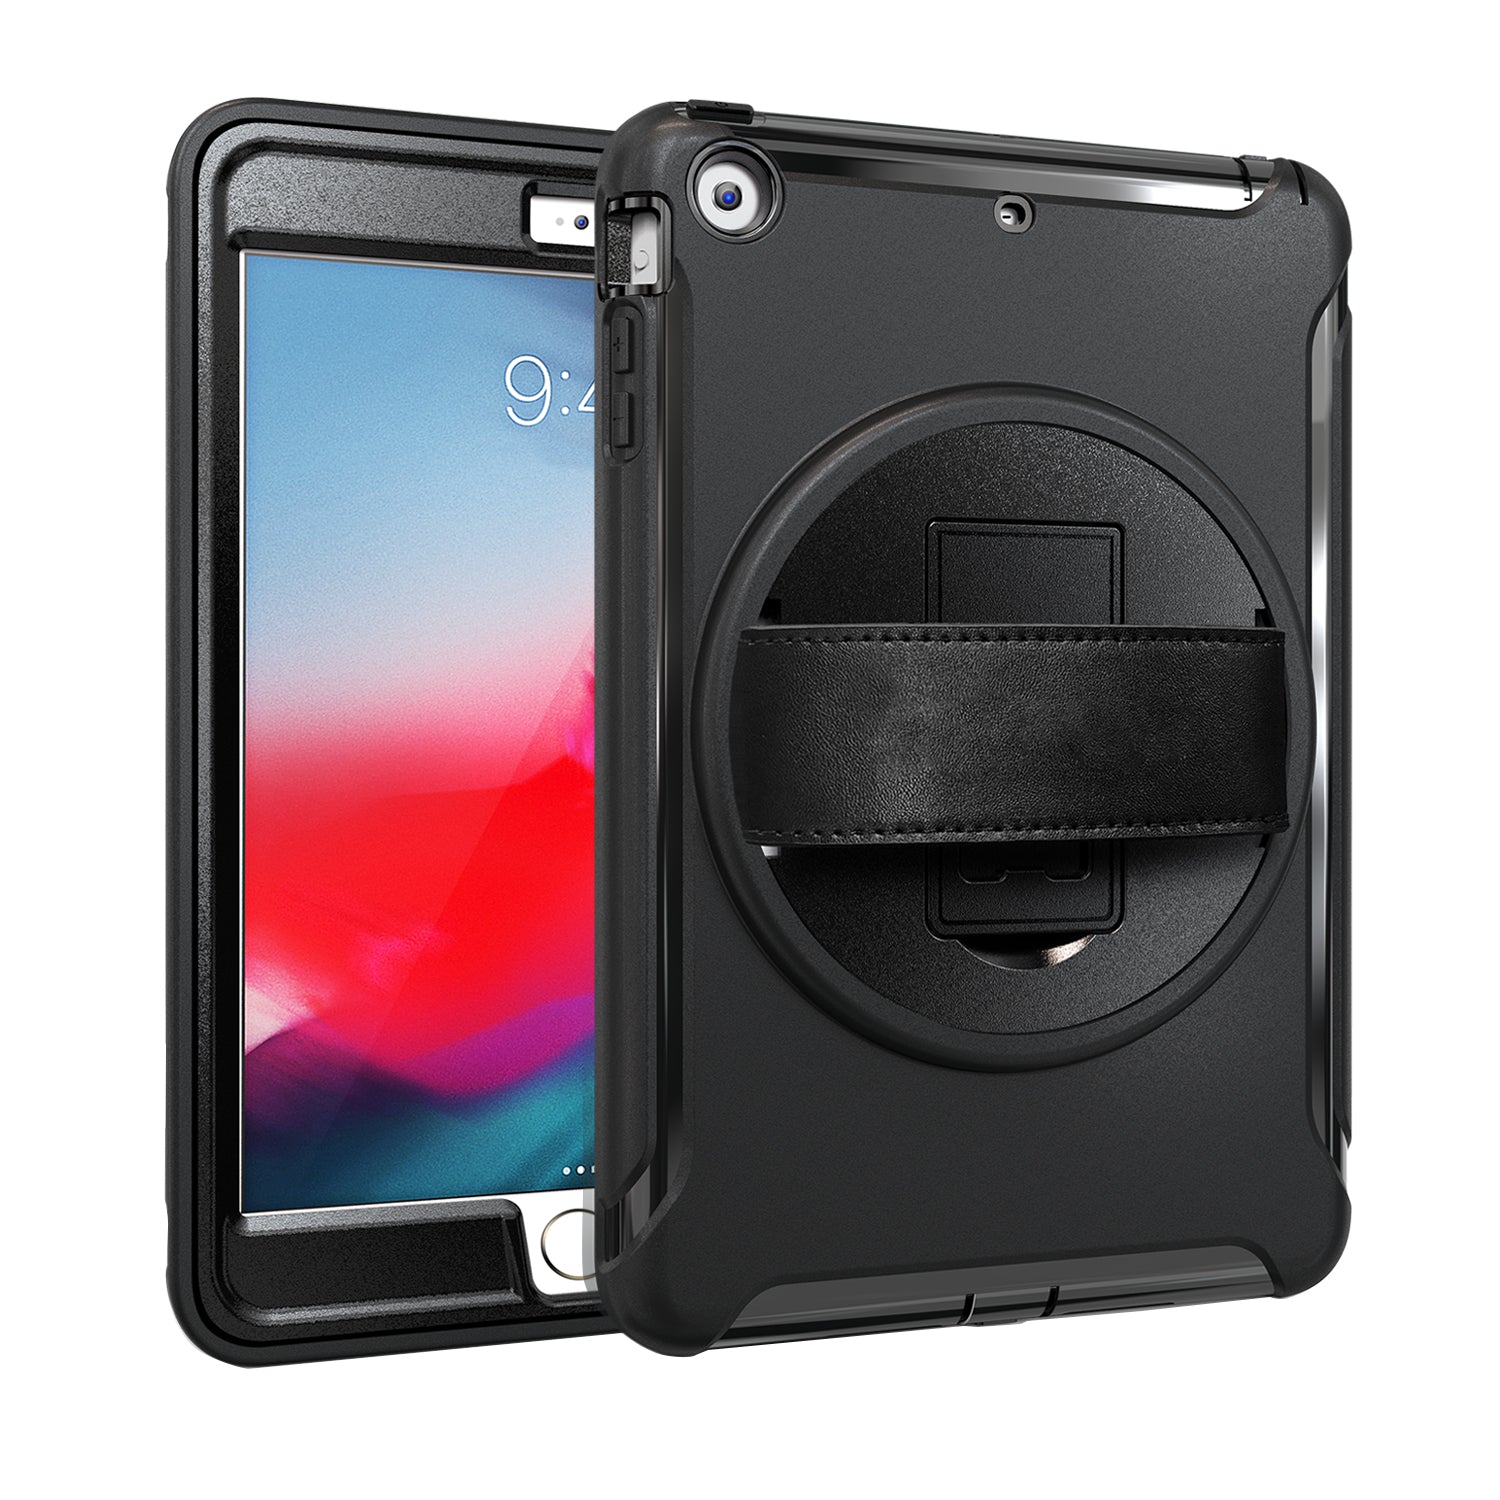 For ipad MINI 1 / 2 / 3 Wrist Handle Tri-proof Shockproof Dustproof Anti-fall Protective Cover with Bracket black ZopiStyle